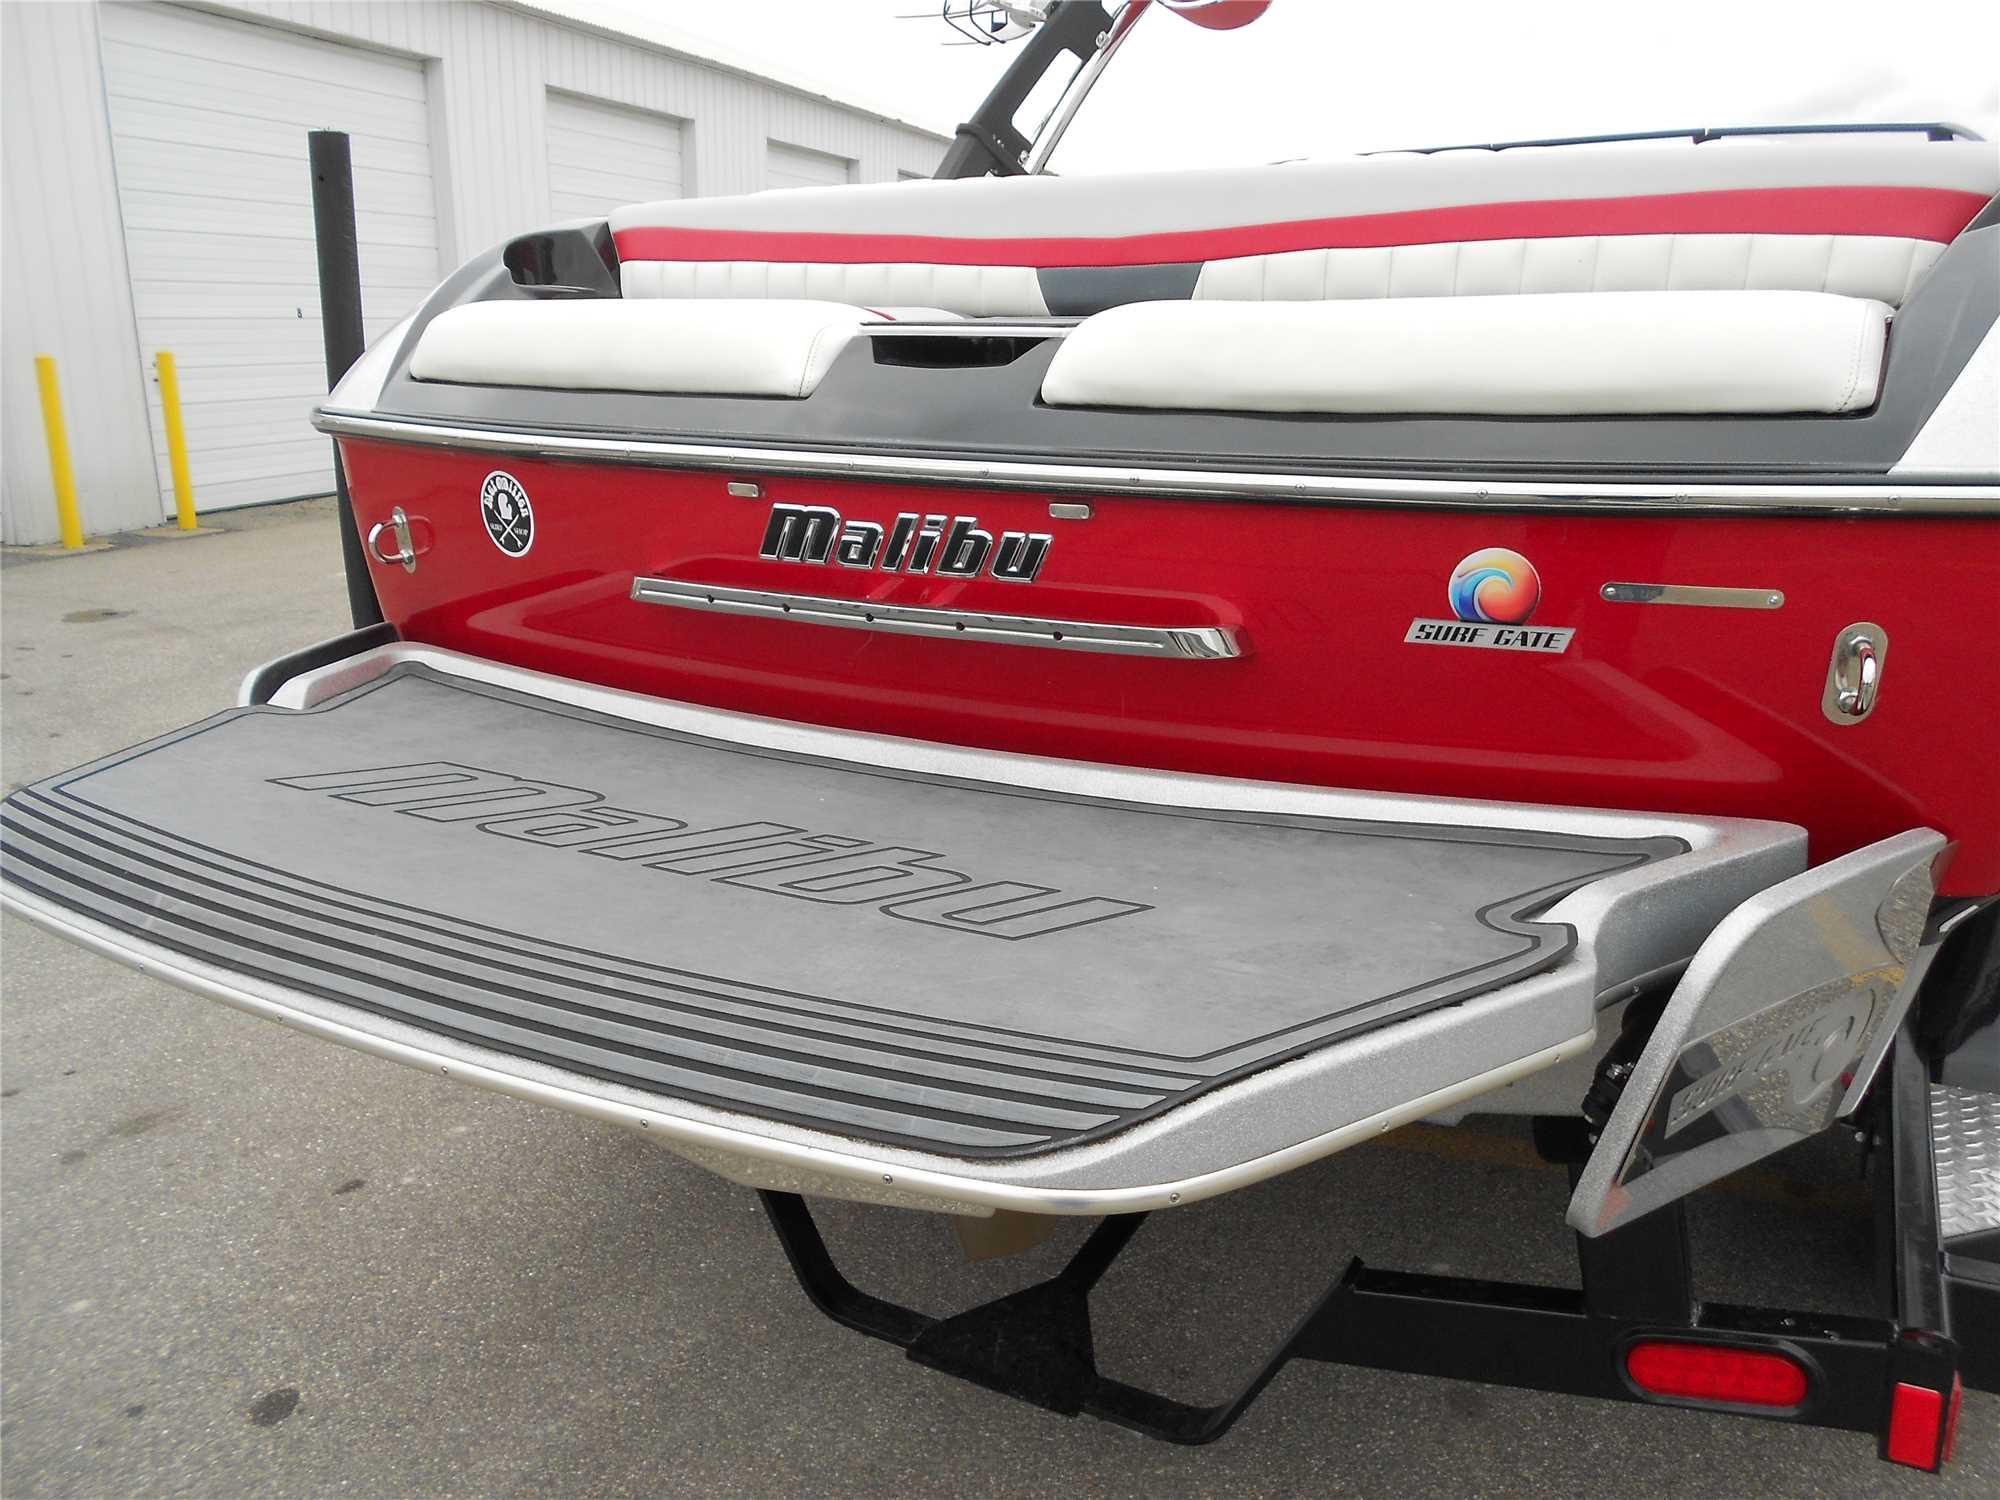 2014 Malibu Model: Wakesetter 22 MXZ. VIN:MB2M9439L314. Hours: 214. This boat is located in Grand Ra